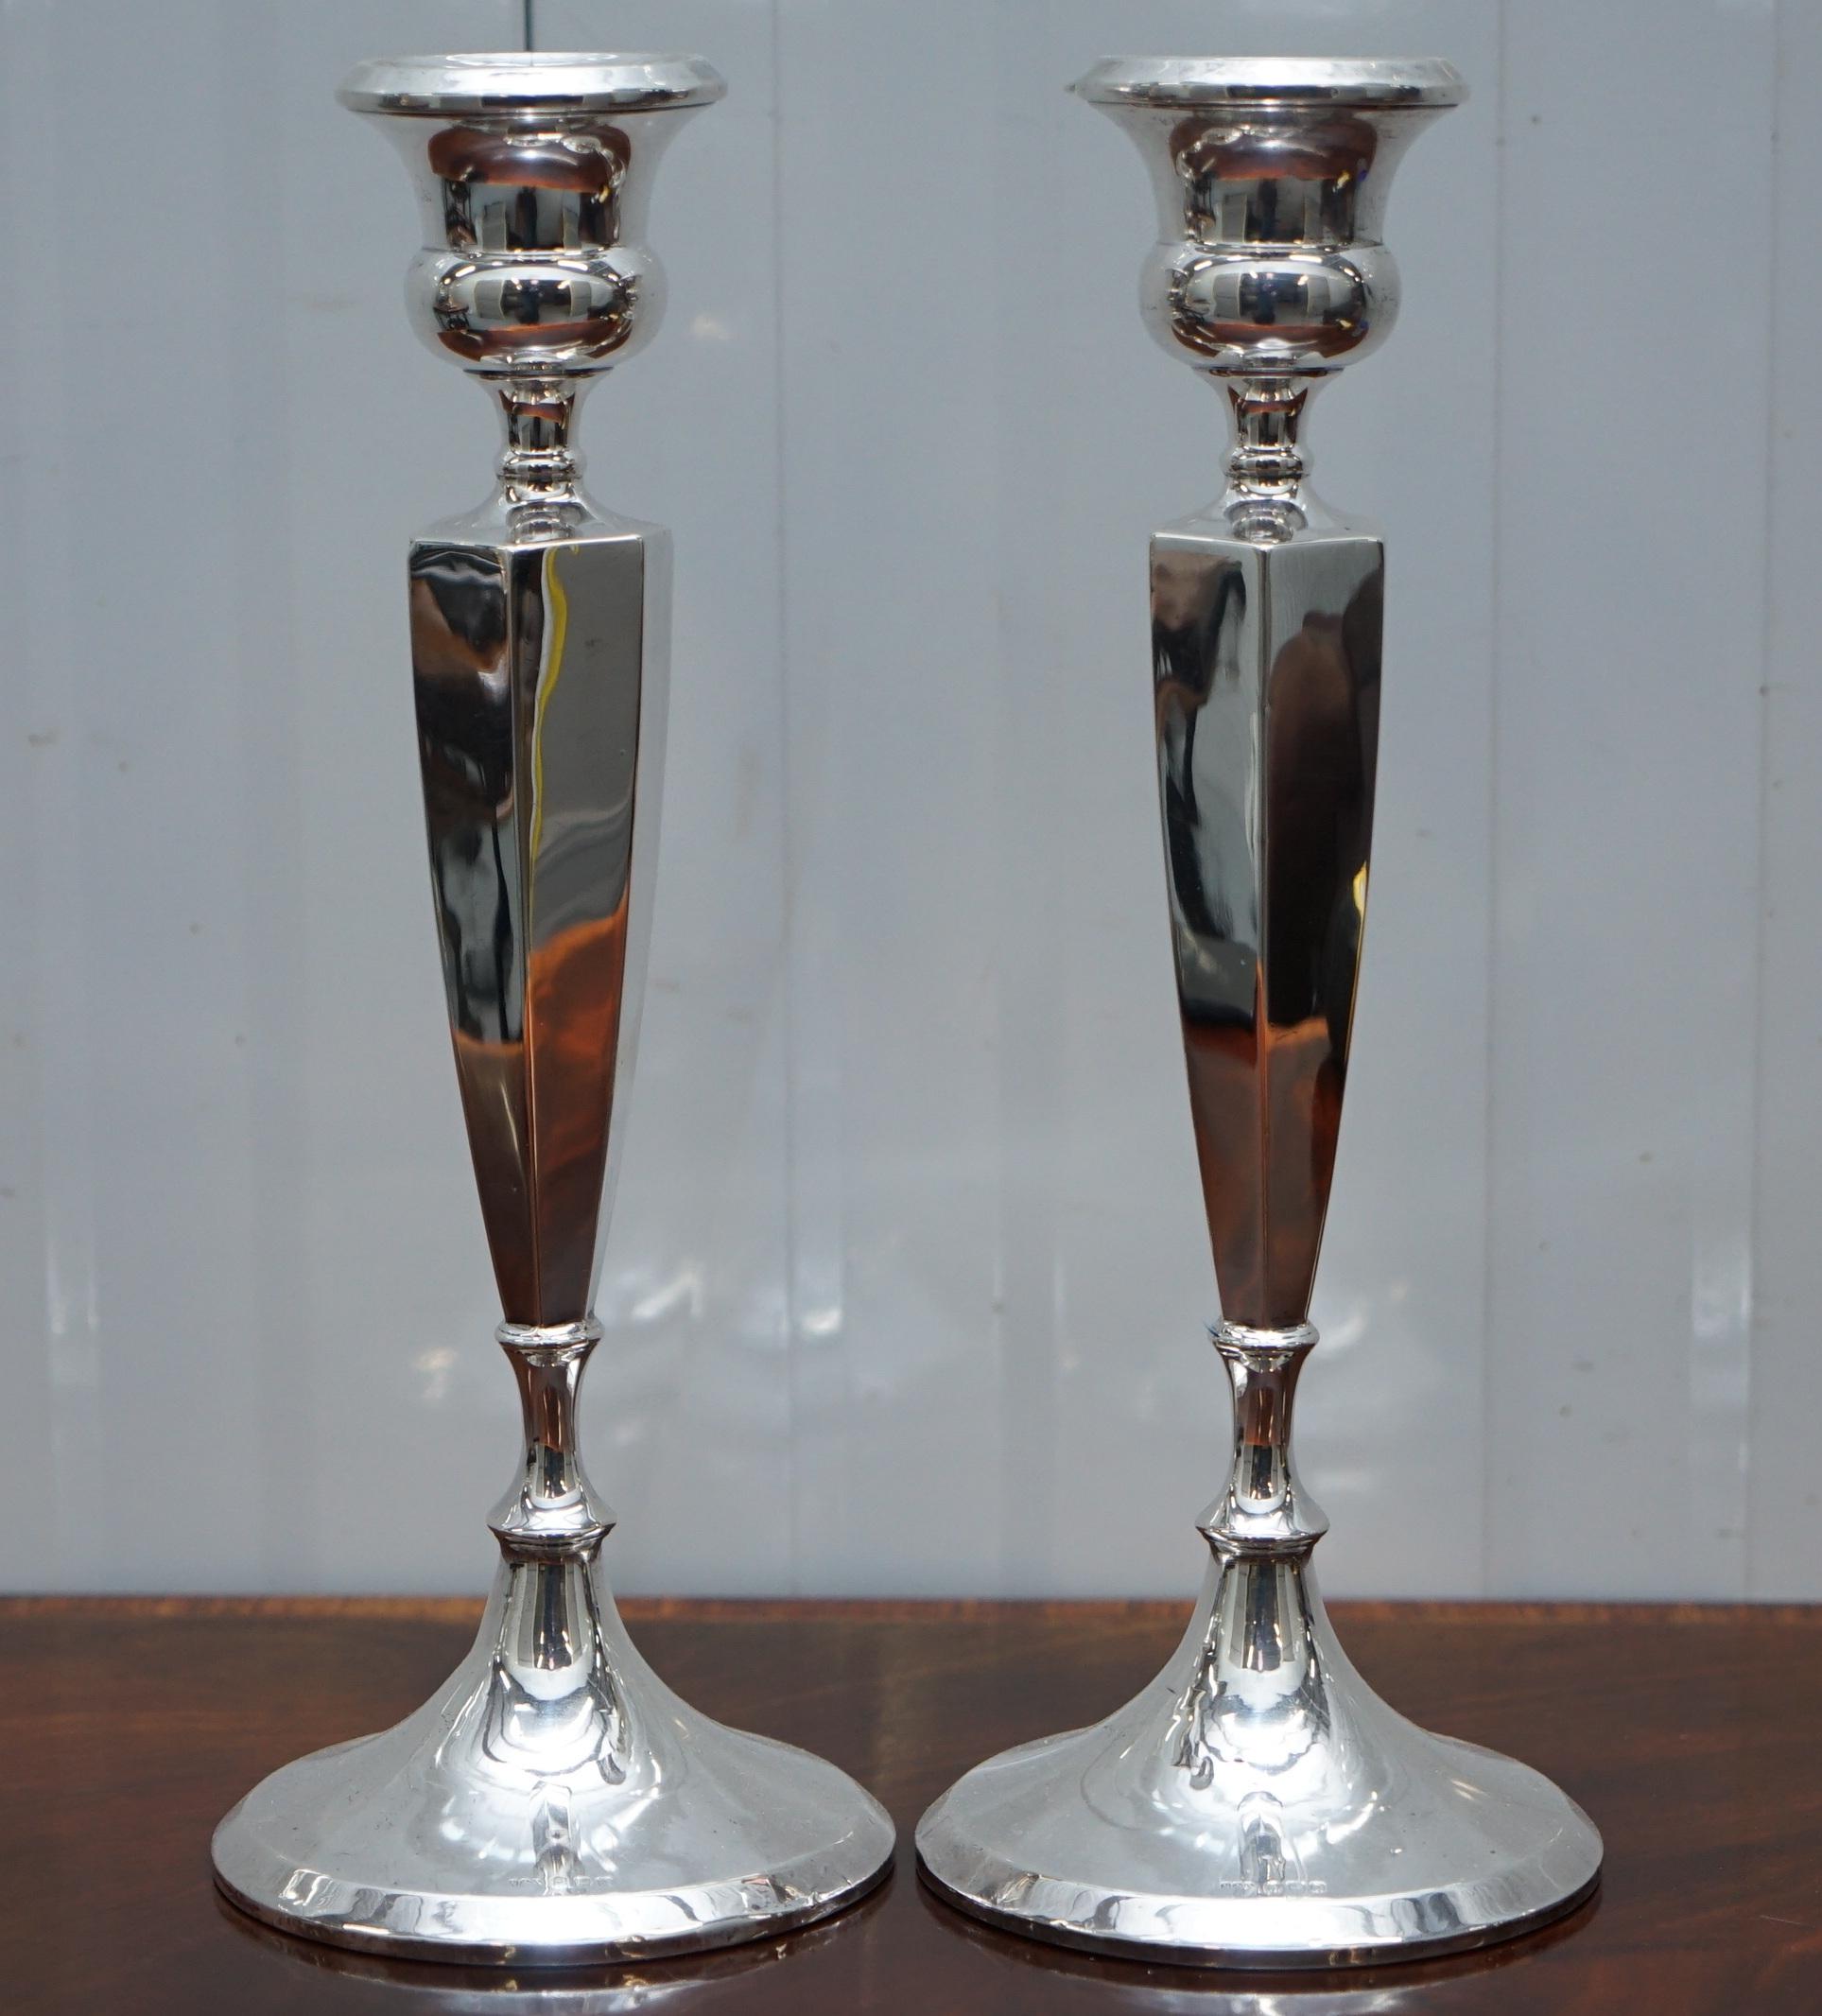 We are delighted to offer for sale this lovely pair of King George V Sterling silver candlesticks, 1920

A nice decorative pair, very tall and elegant Birmingham made and very elegant

Date letter V for 1920

The ships anchor for